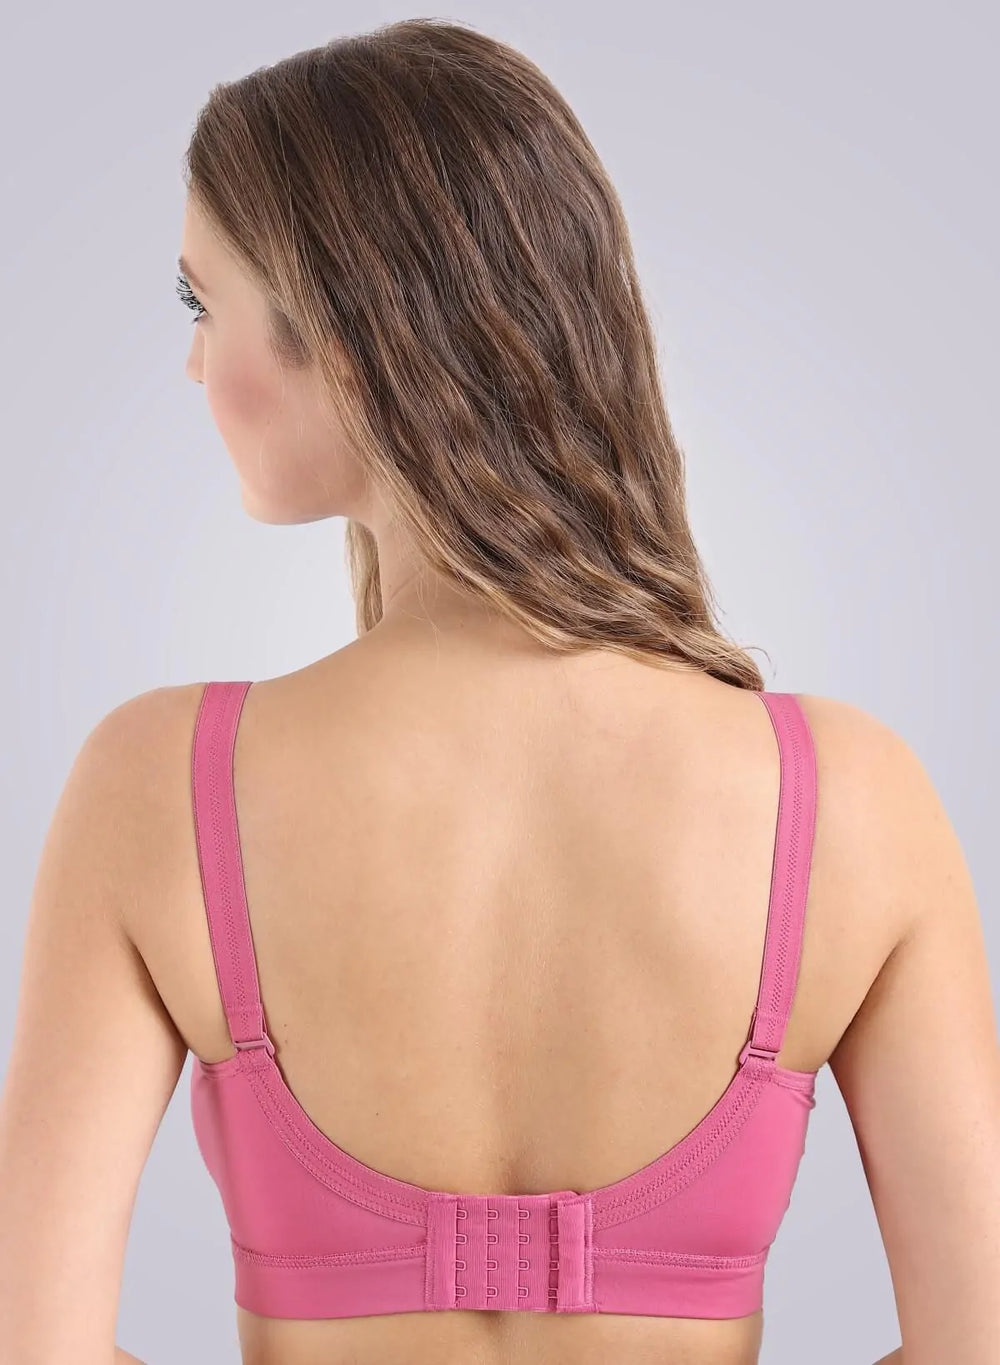 Trylo Sportic bra is specially designed to give unconditional support  during sports STYLE SPORTIC